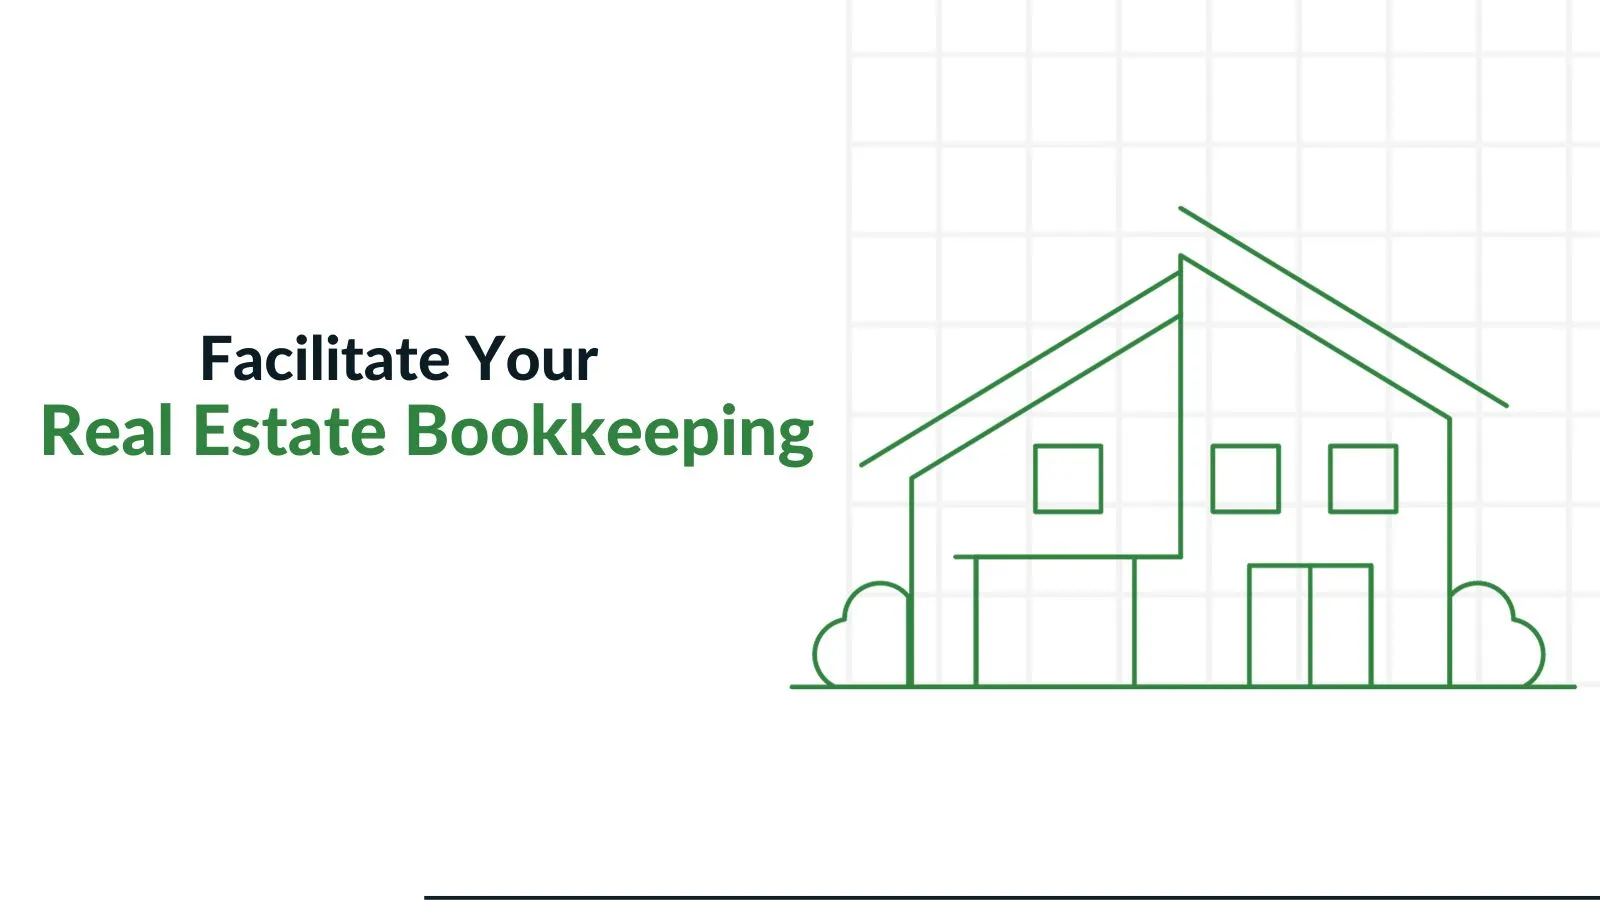 Real estate bookkeeping 101